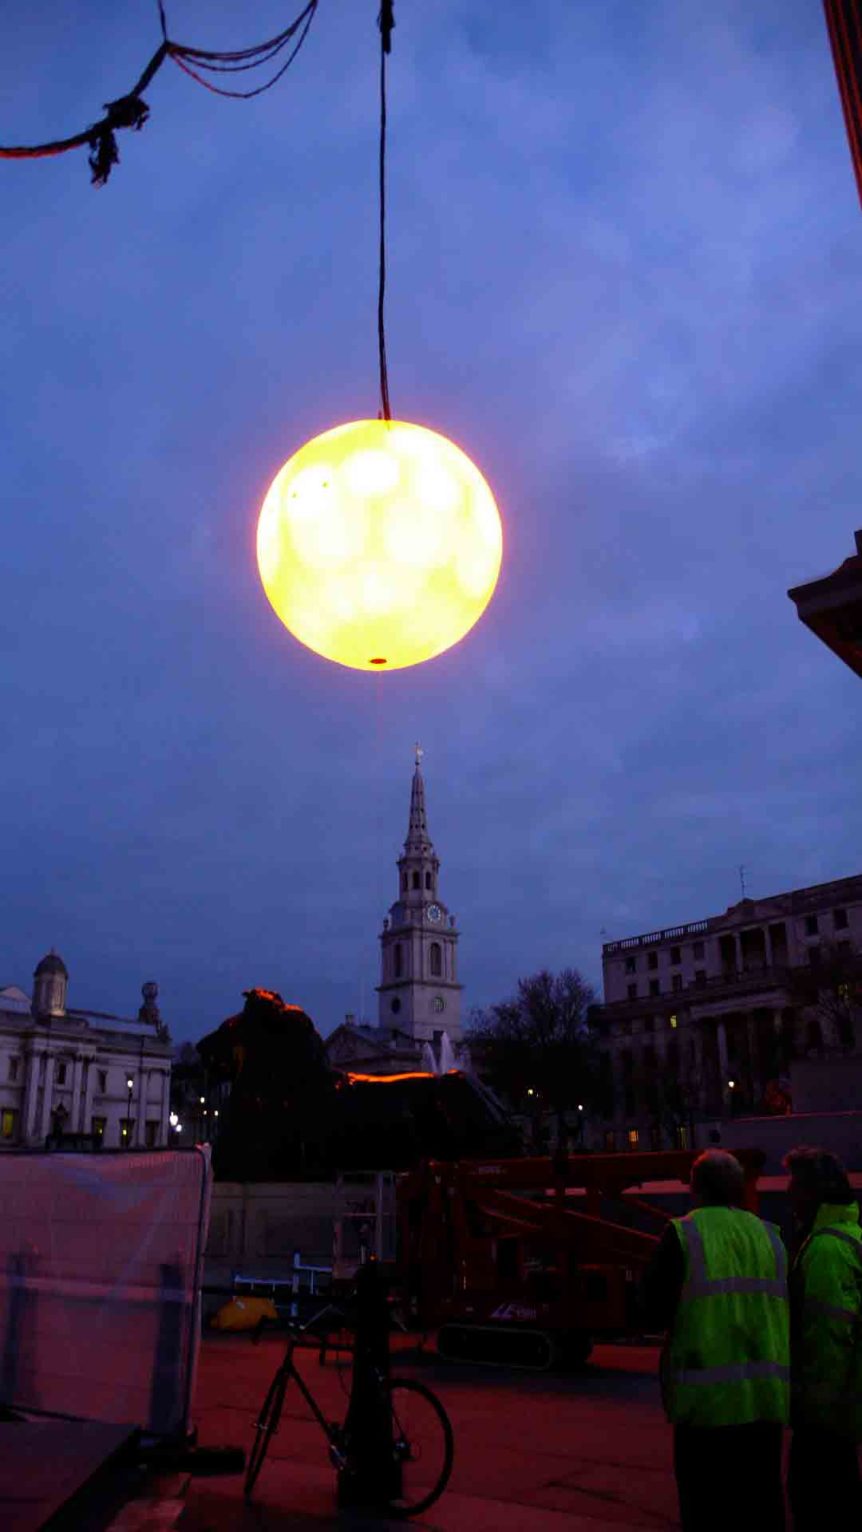 Inflatable moon light suspended with city skyline behind